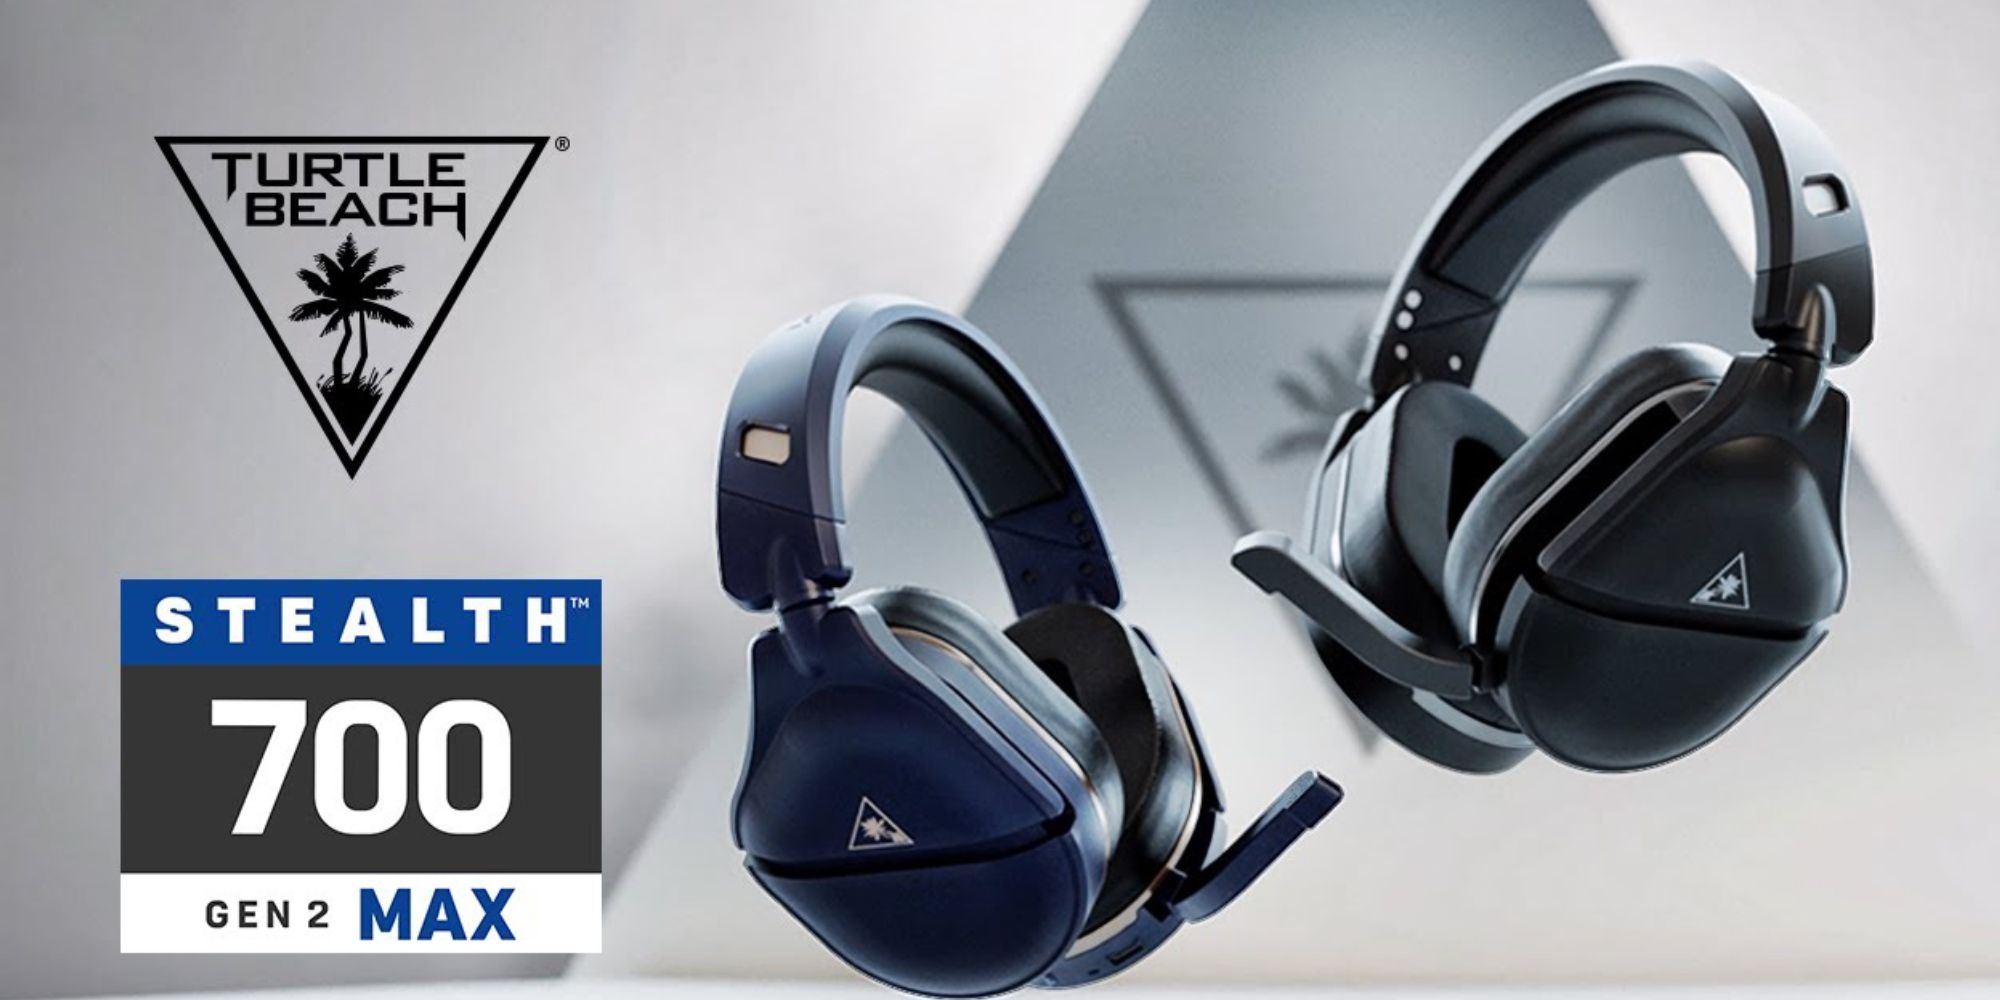 Turtle Beach headset stealth 700 two colours side by side